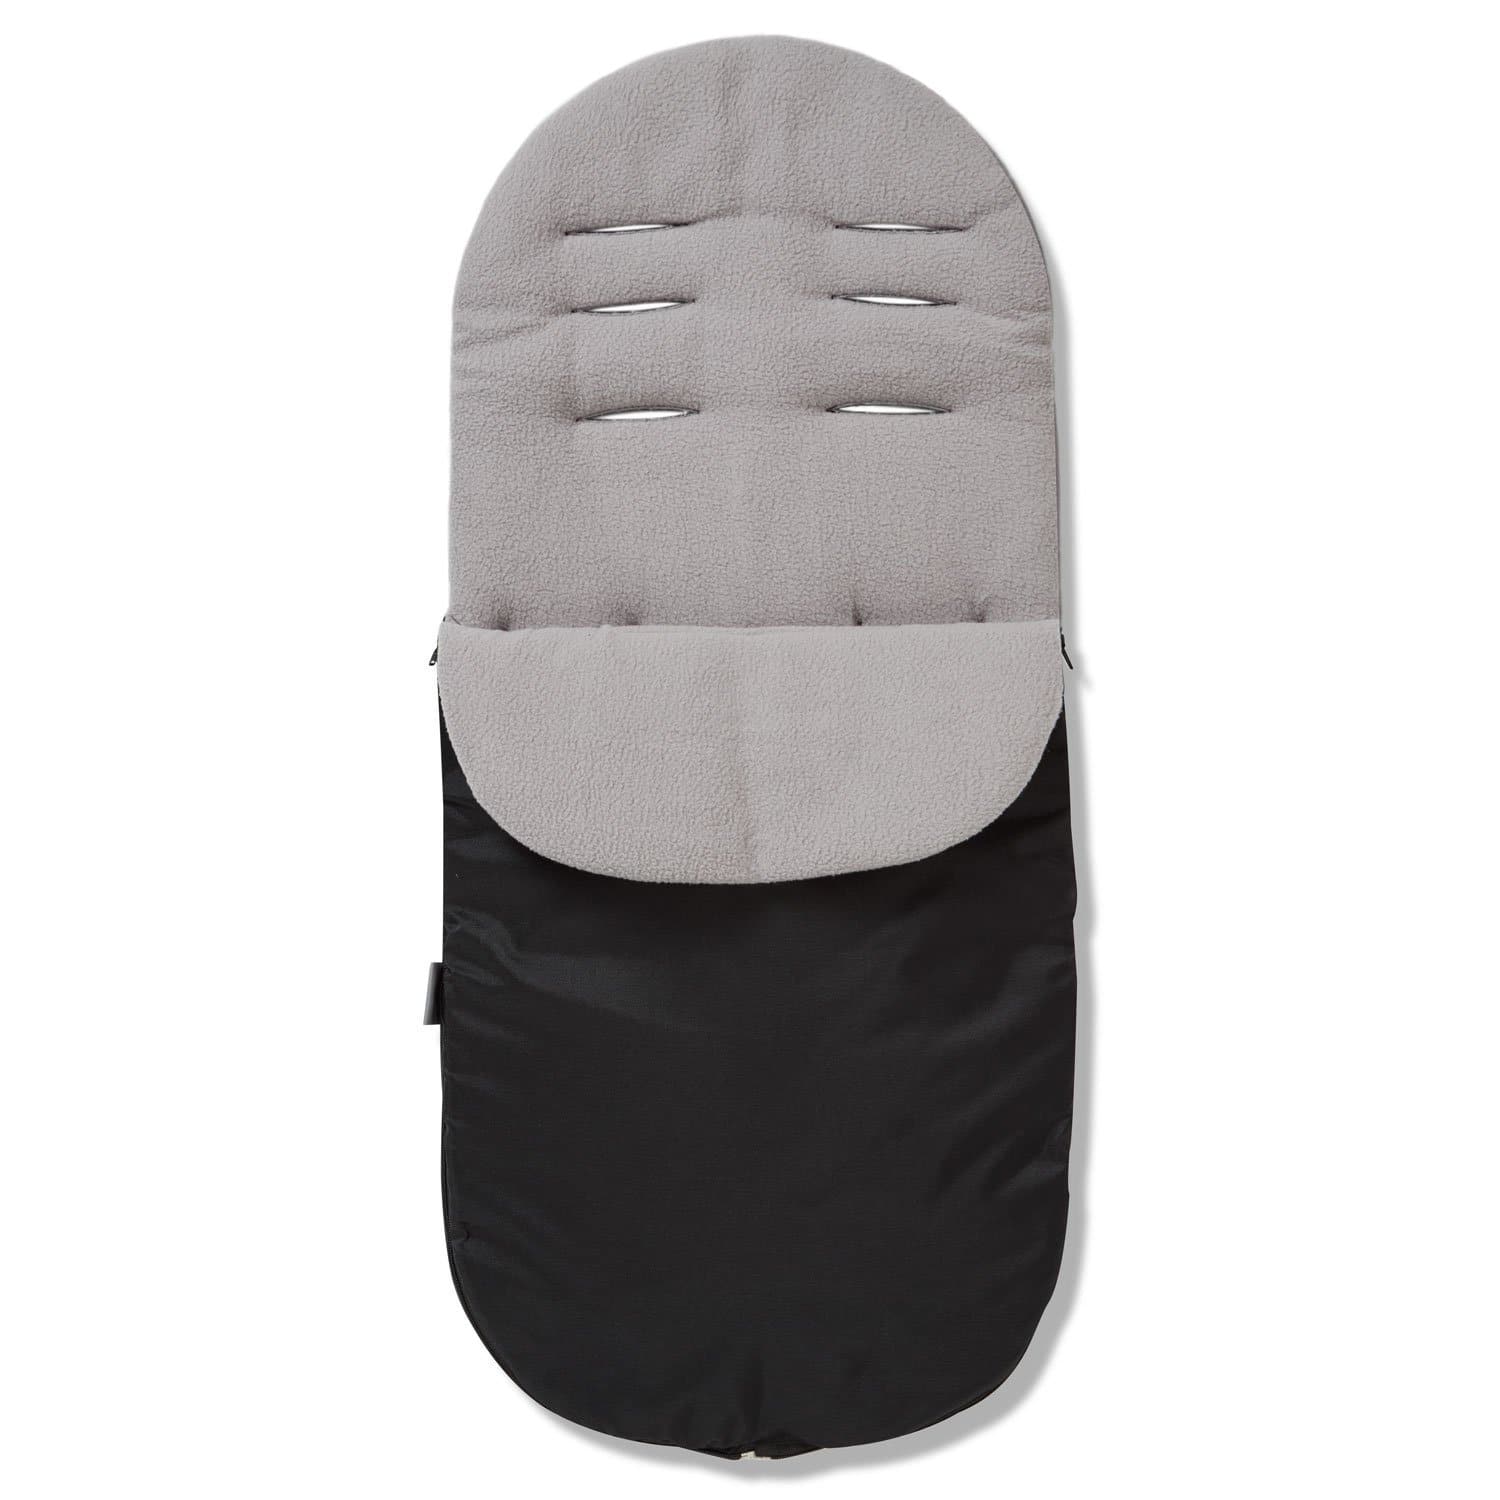 Footmuff / Cosy Toes Compatible with Inglesina - Grey / Fits All Models | For Your Little One